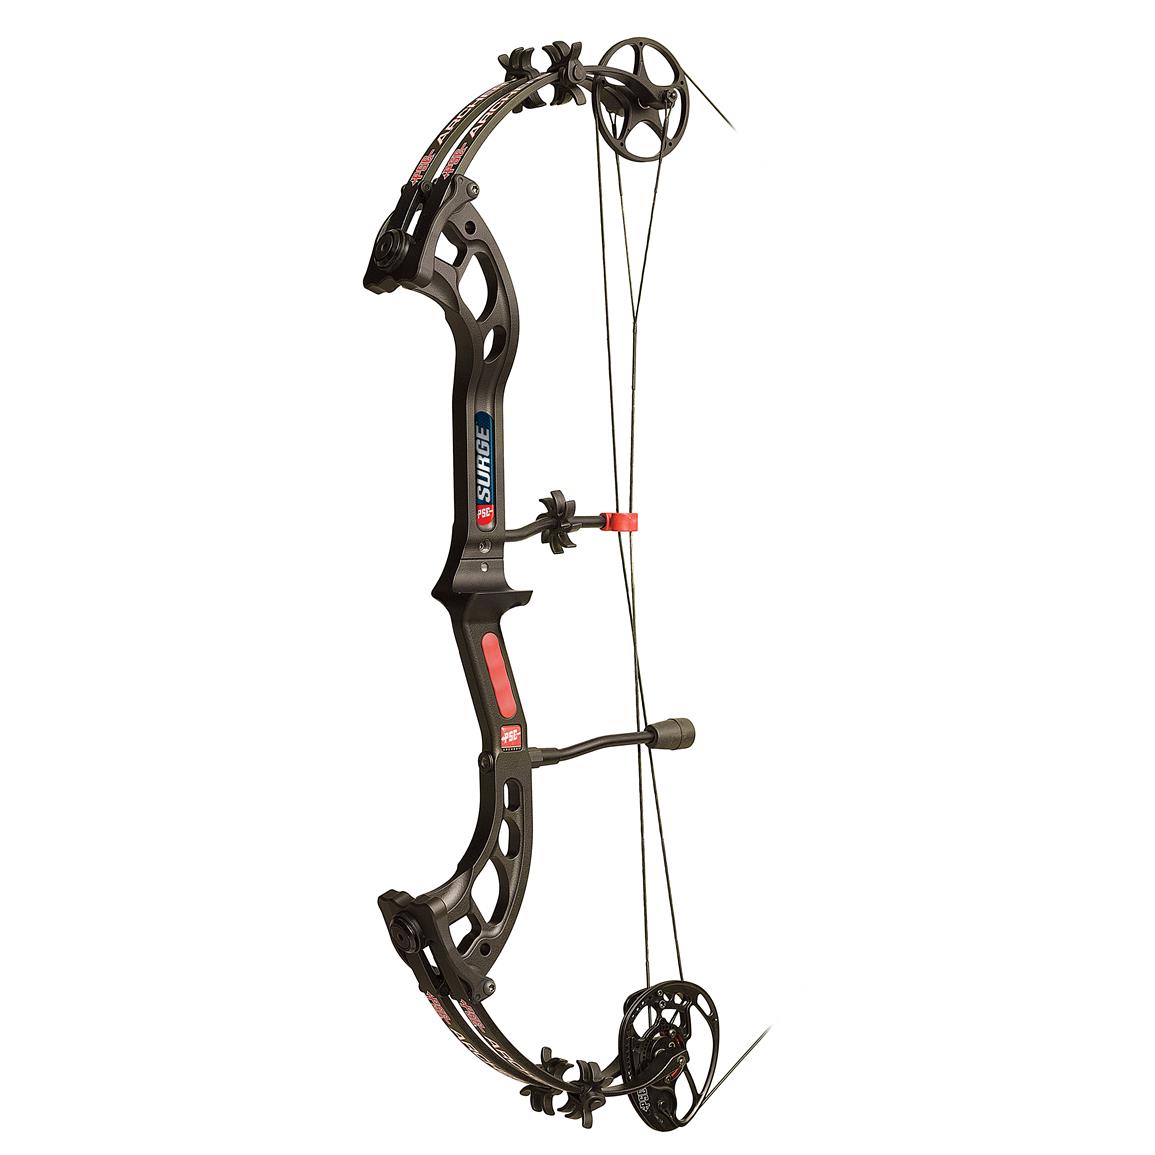 pse-surge-compound-bow-649268-bows-at-sportsman-s-guide